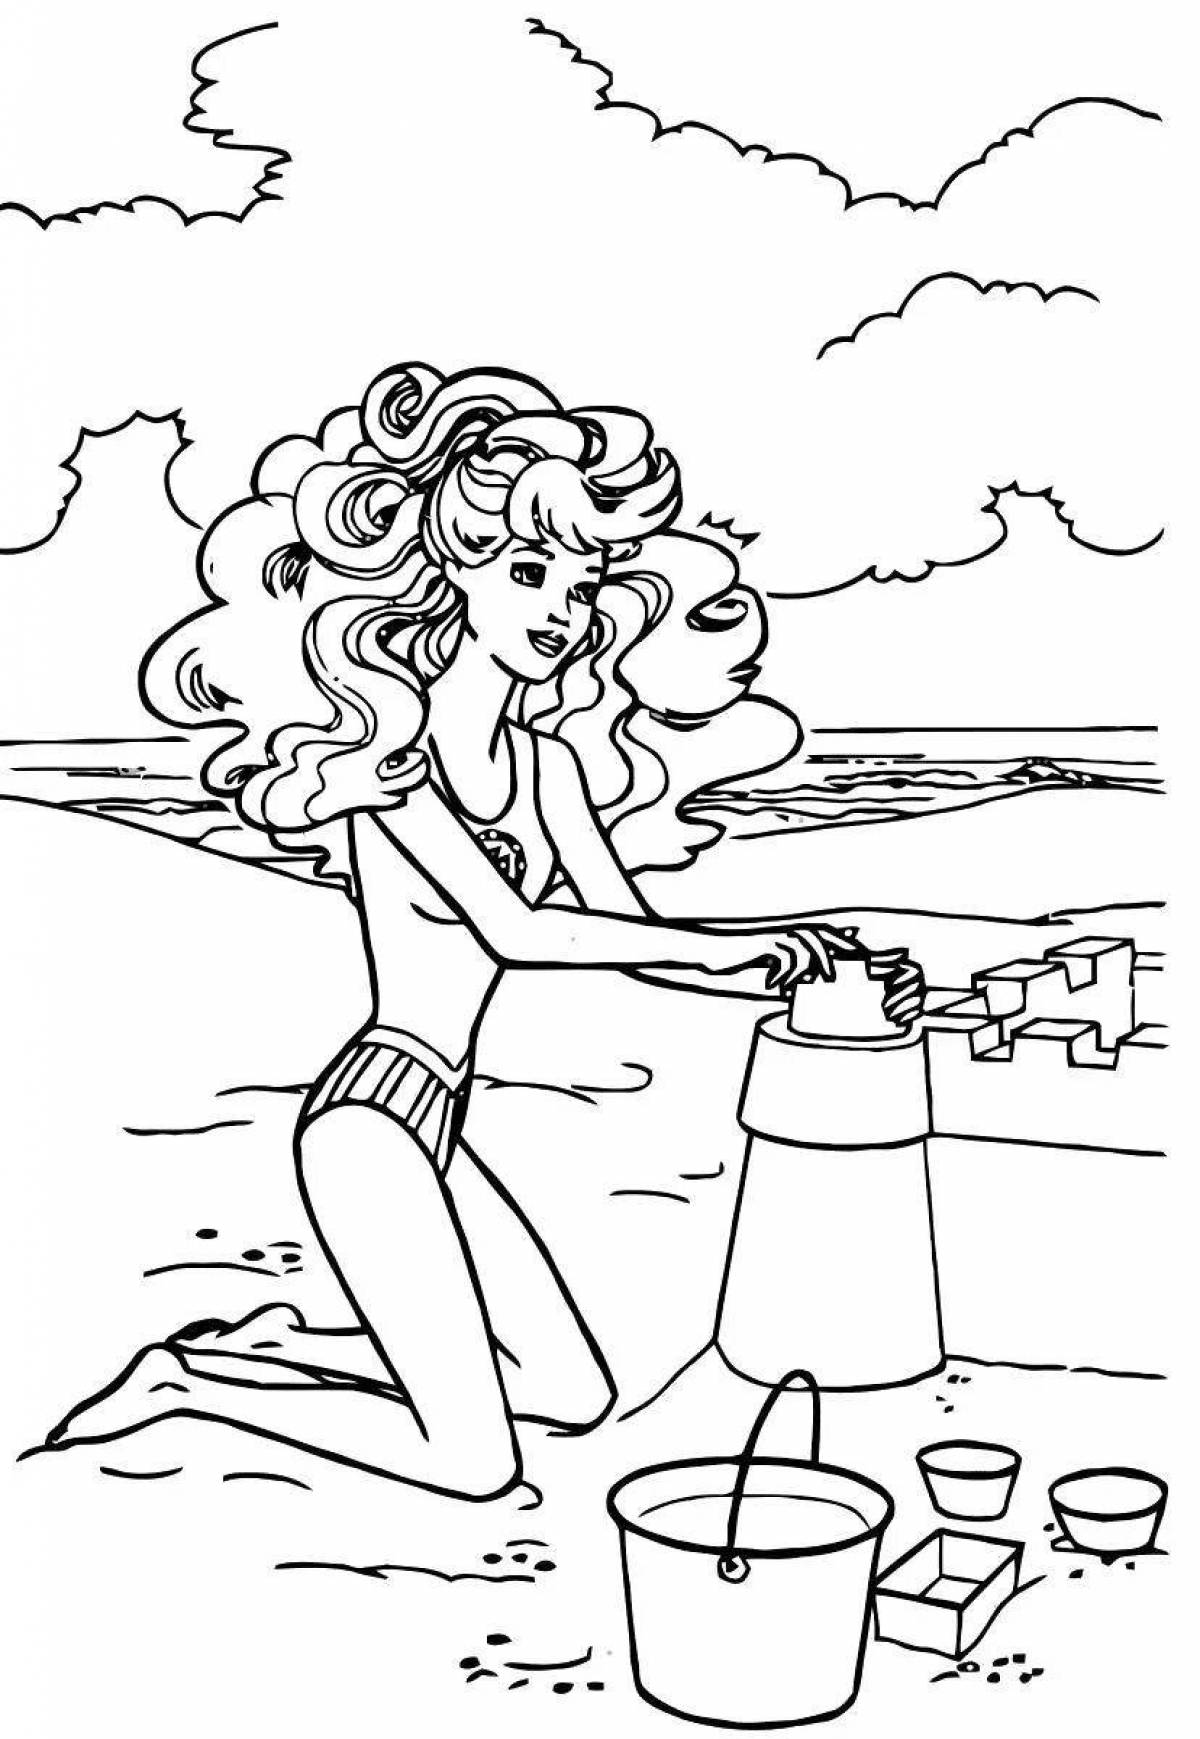 Coloring book shining barbie on the beach